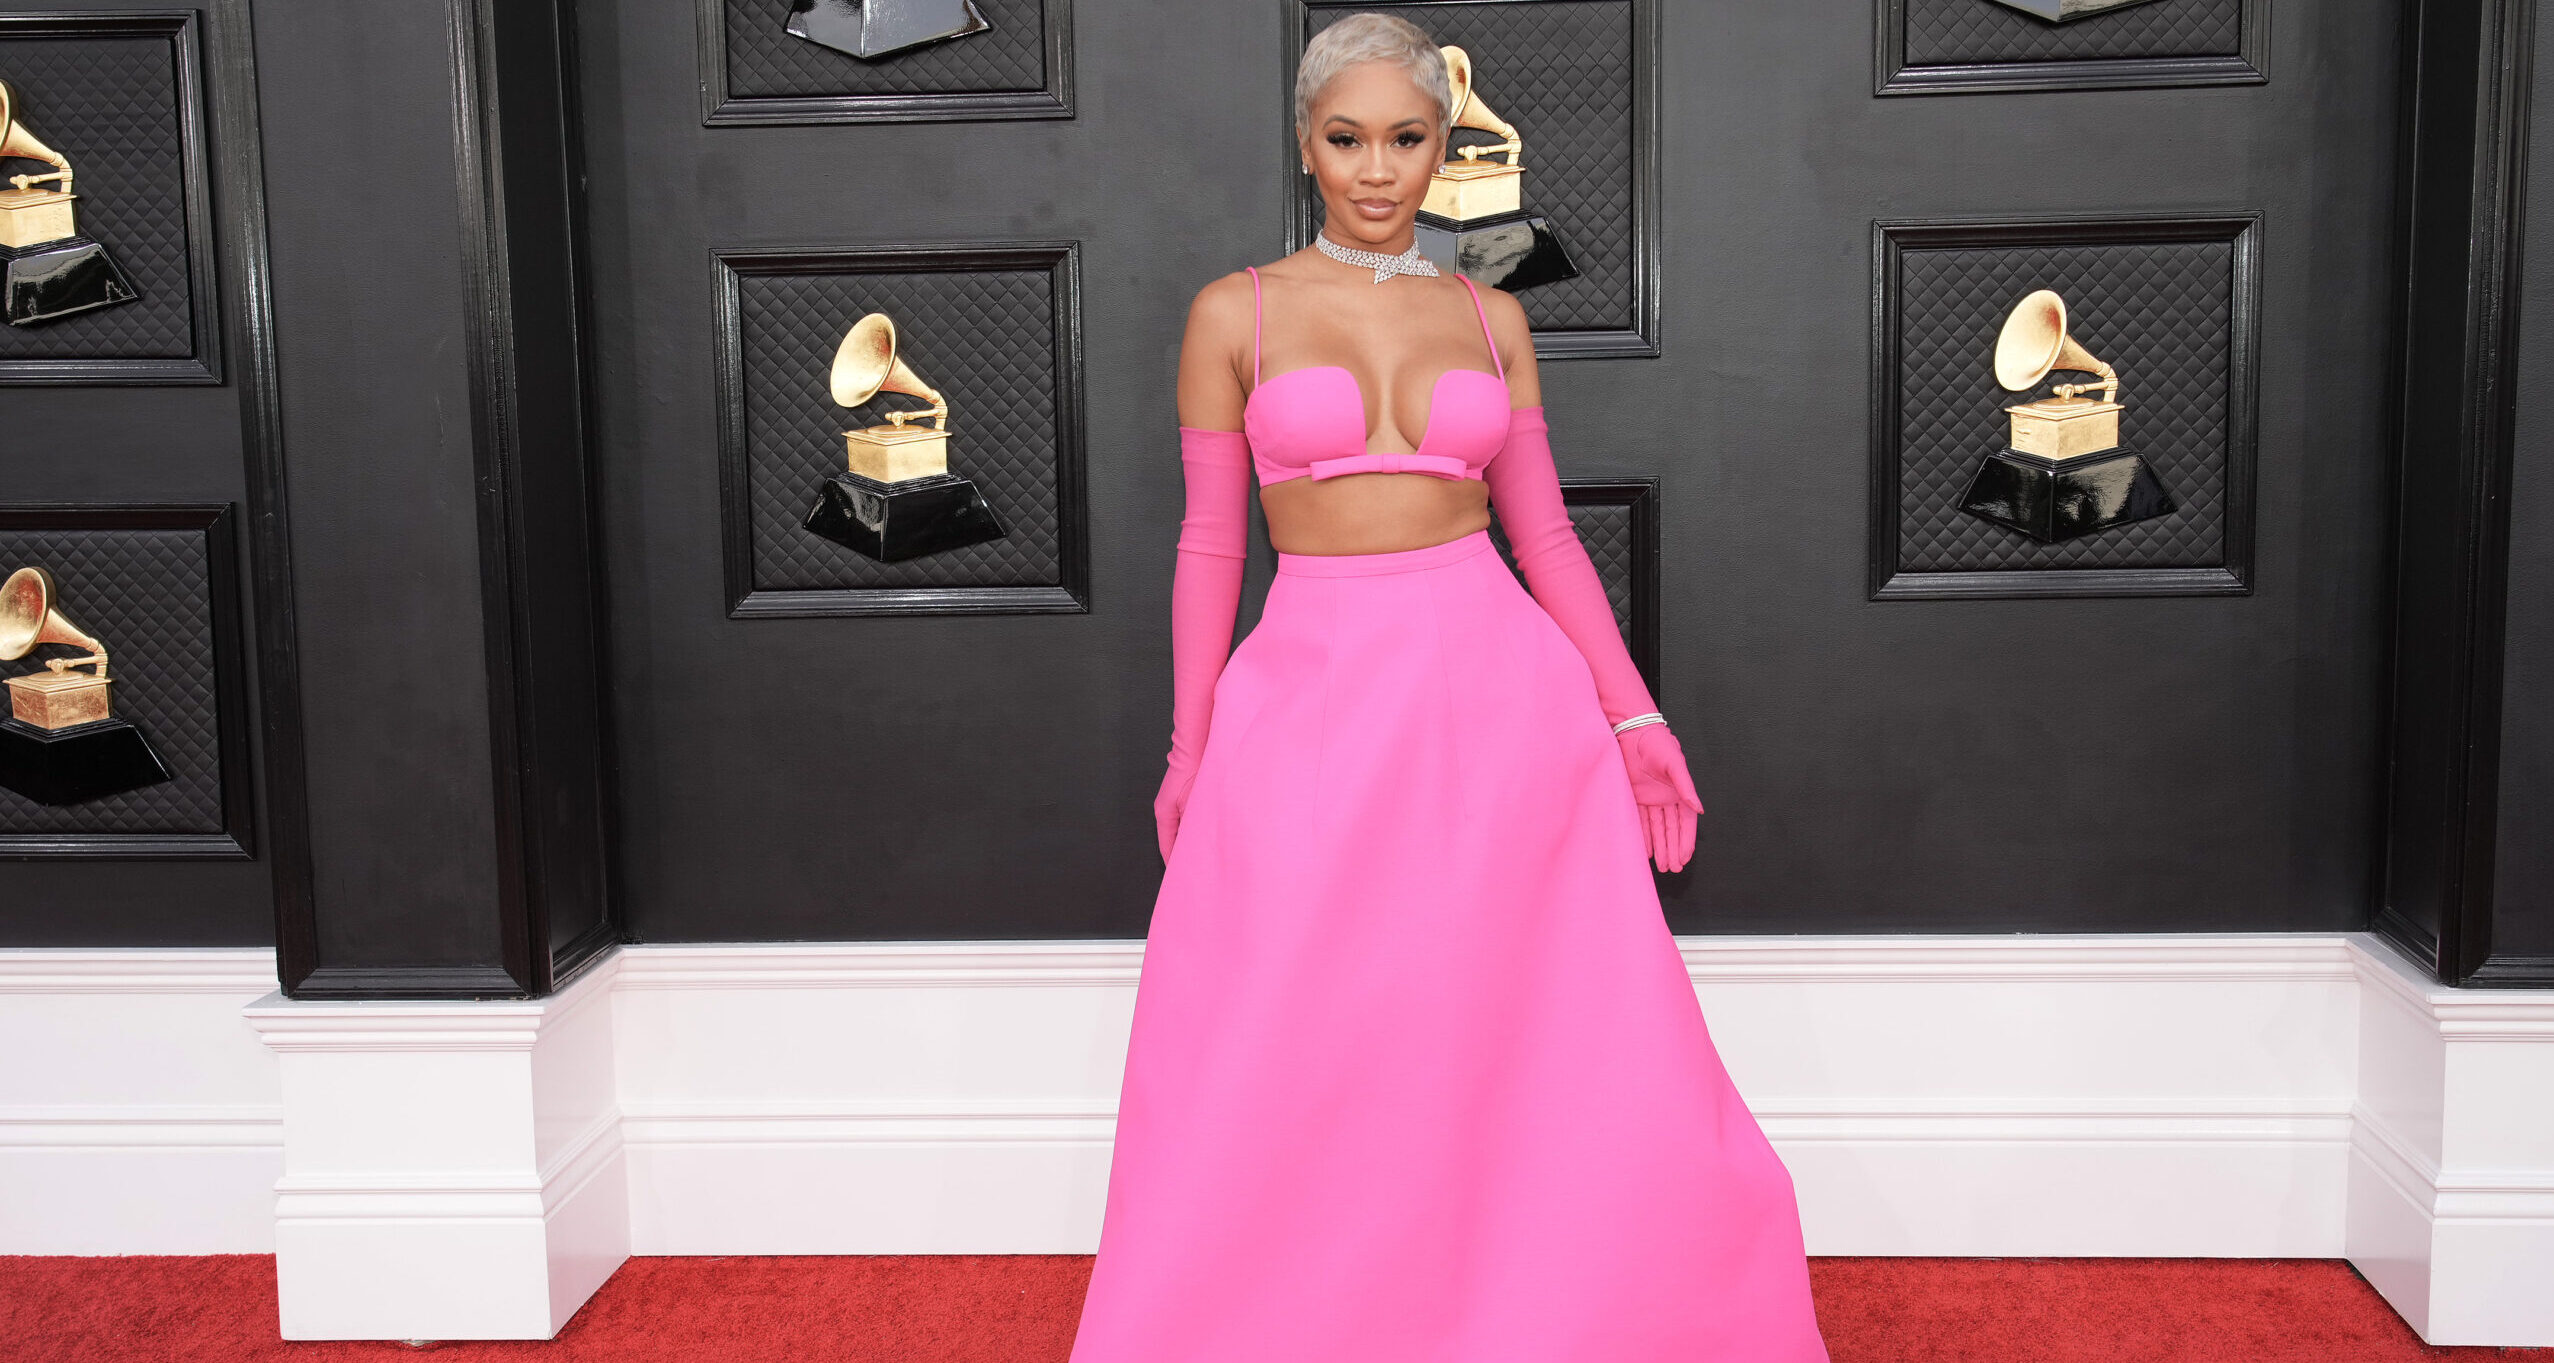 Saweetie Is Pretty In Pink At The 64th Grammy Awards